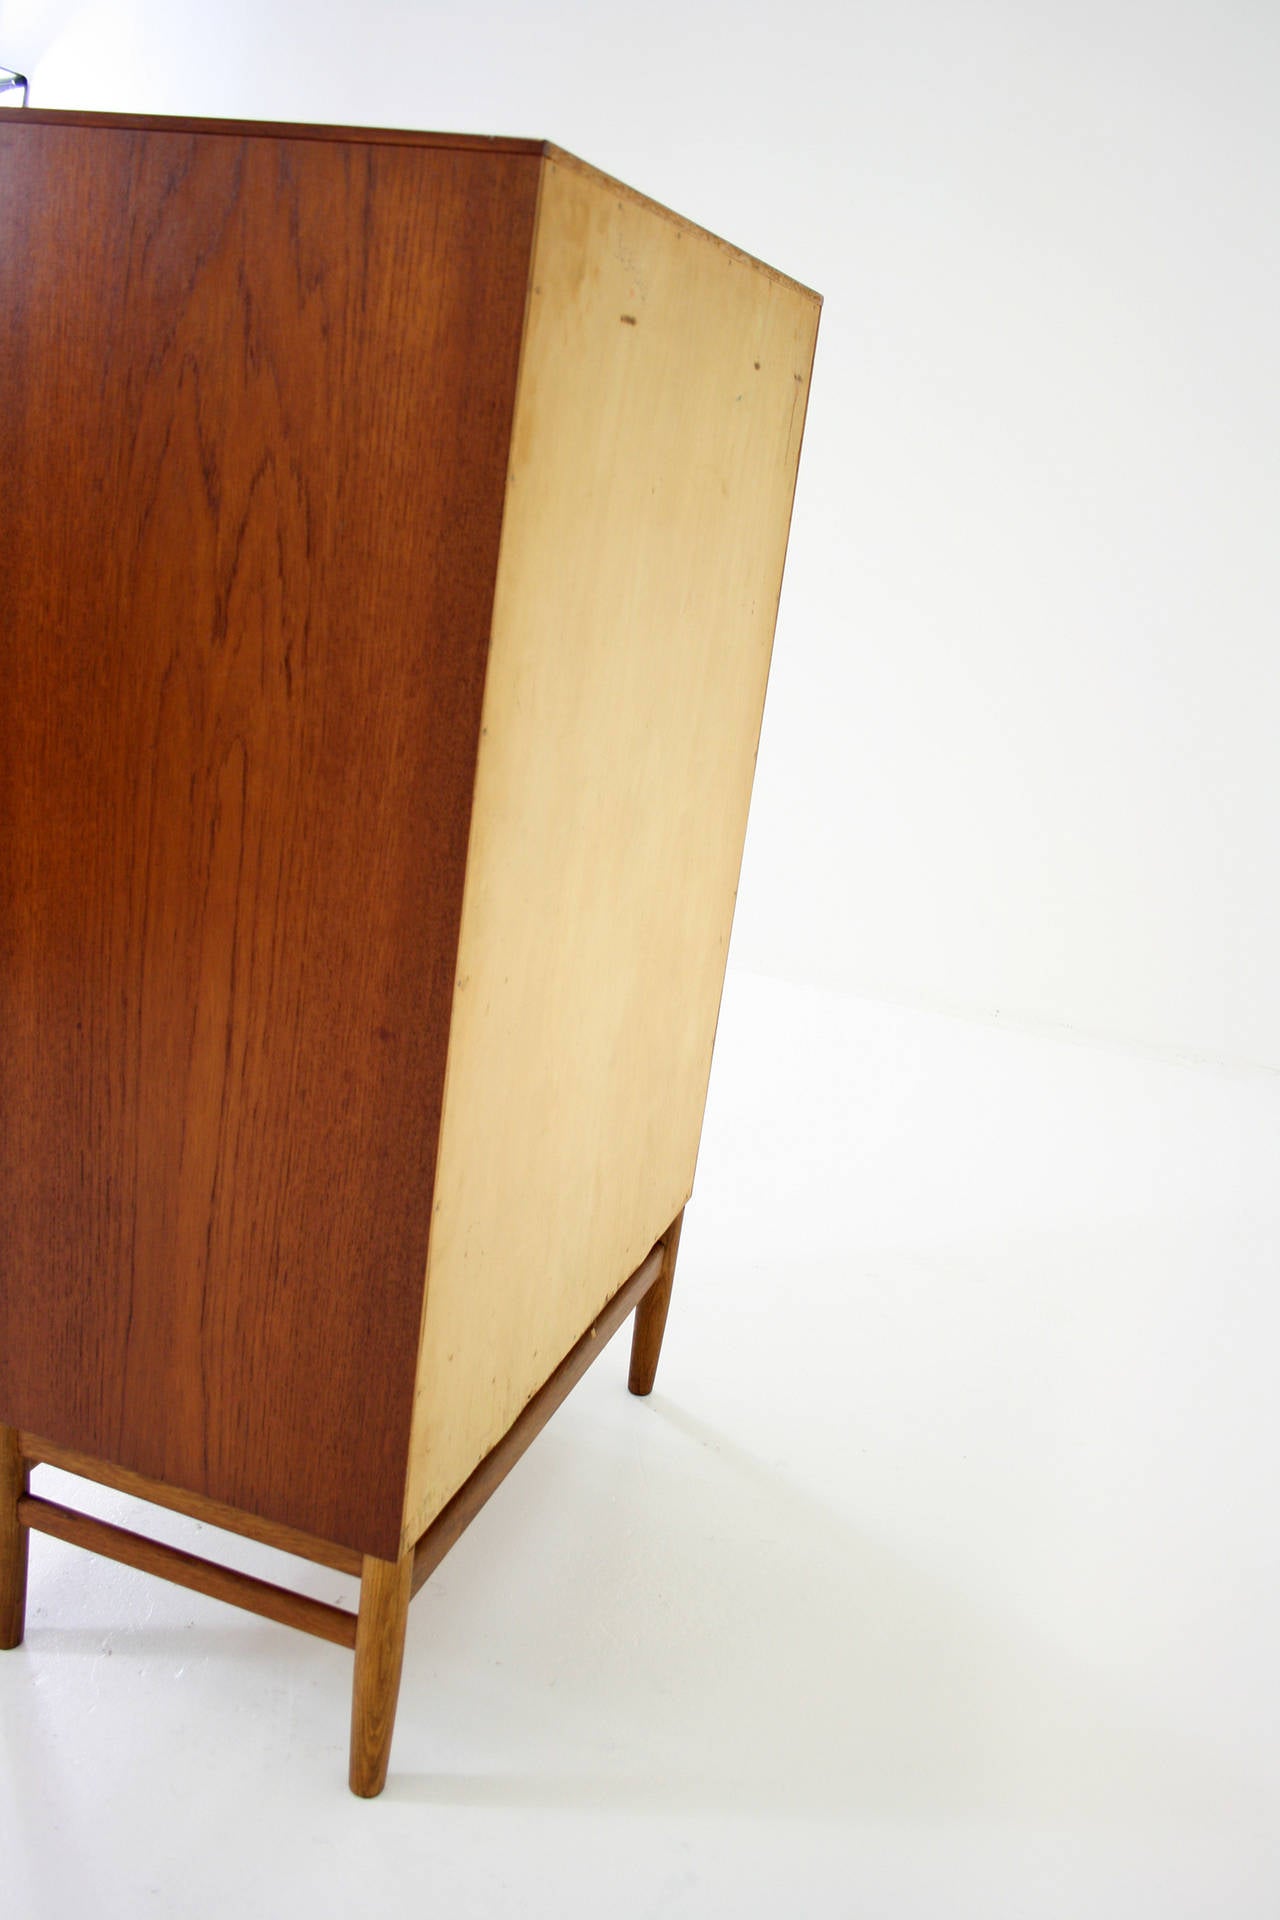 Danish Mid Century ModernTeak Dresser chest of Drawers by Poul Volther 3